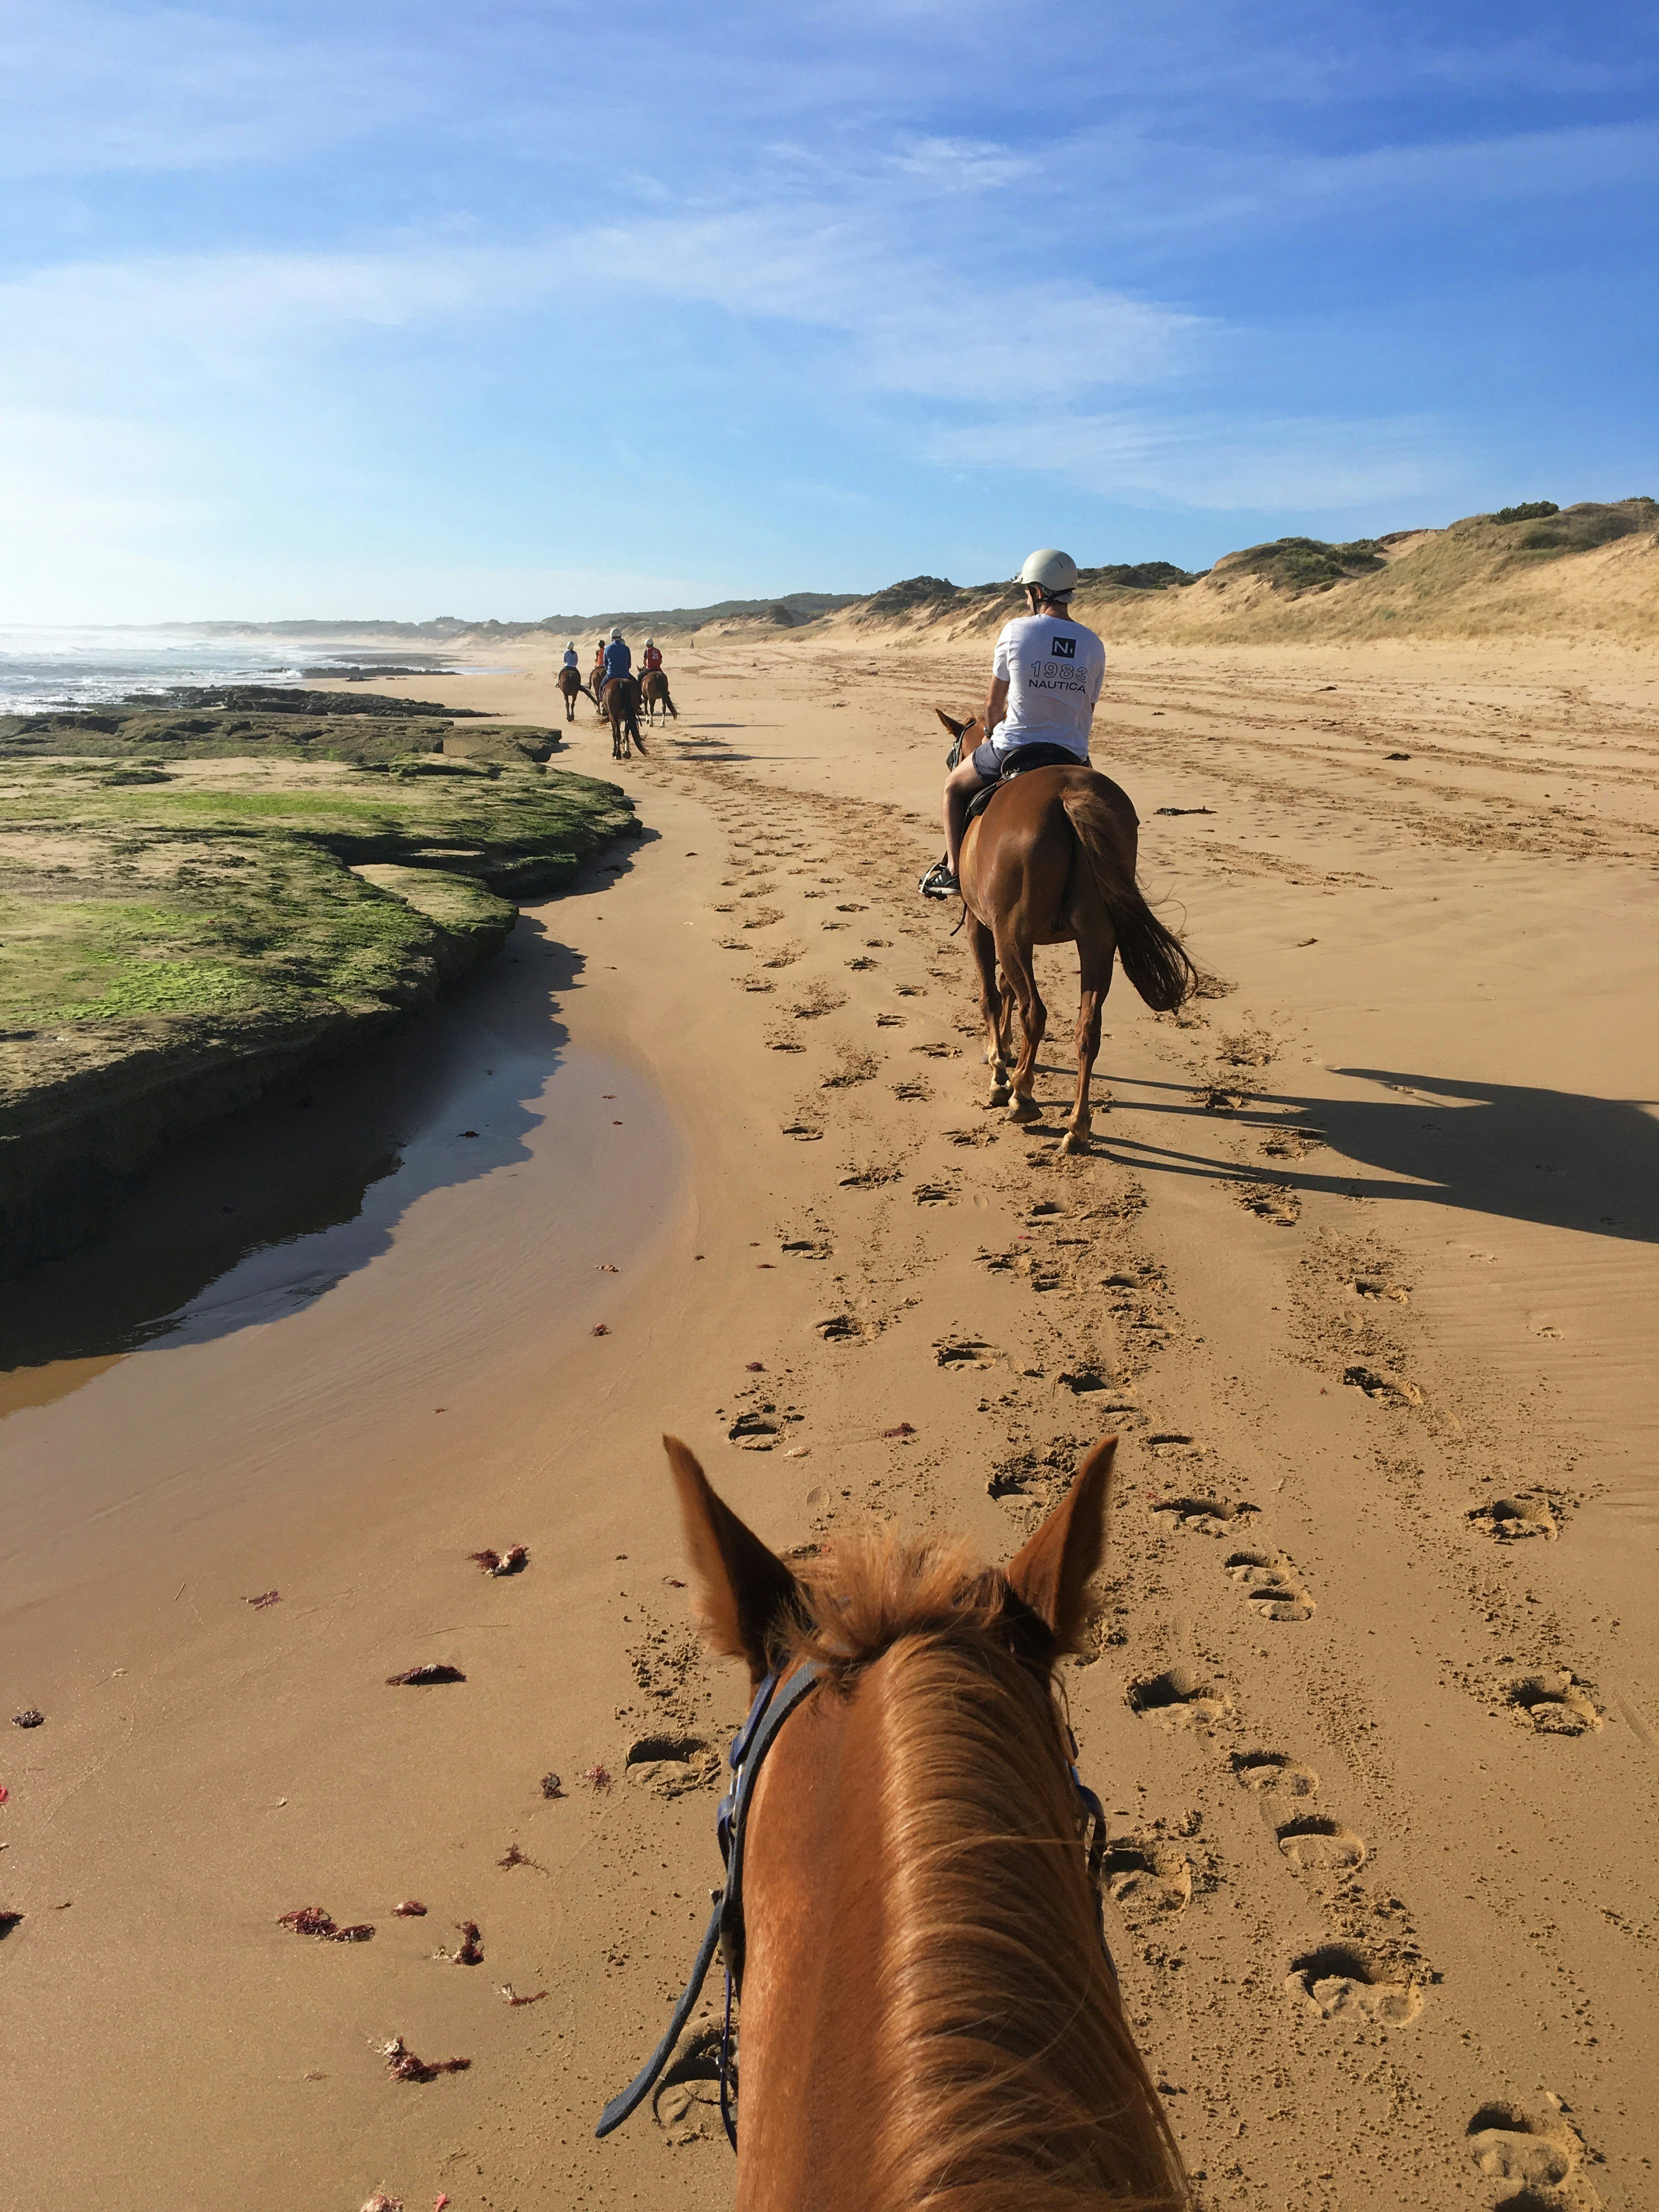 Photo taken from the point of view of a person on horseback; the rider is with several others, riding along St Andrew's Beach.